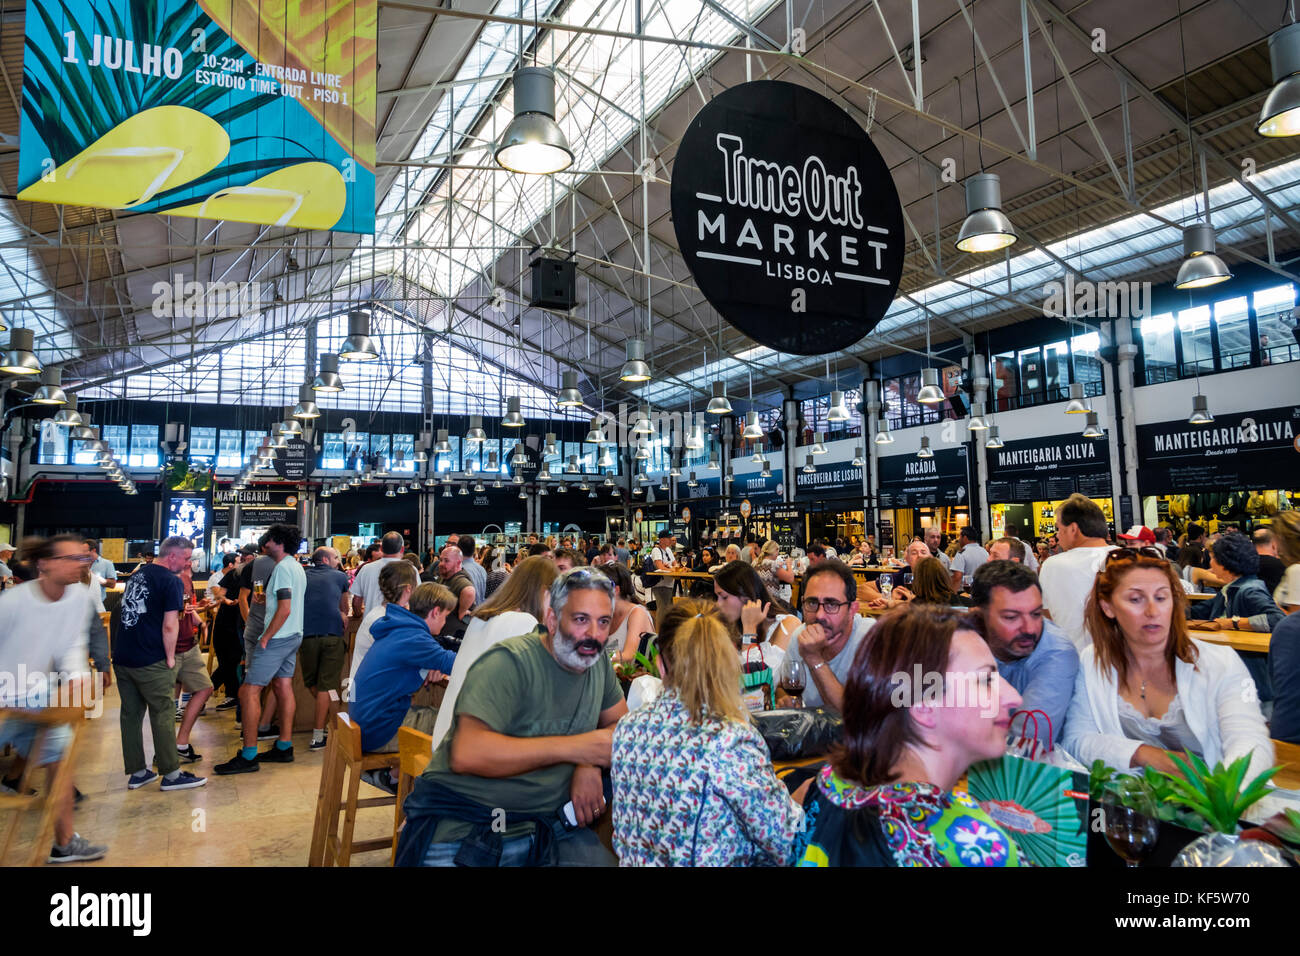 Lisbon Portugal,Cais do Sodre,Mercado Da Ribeira,Time Out Market,market hall,food court plaza,dining,tables,crowded,busy,Hispanic man men male,woman f Stock Photo